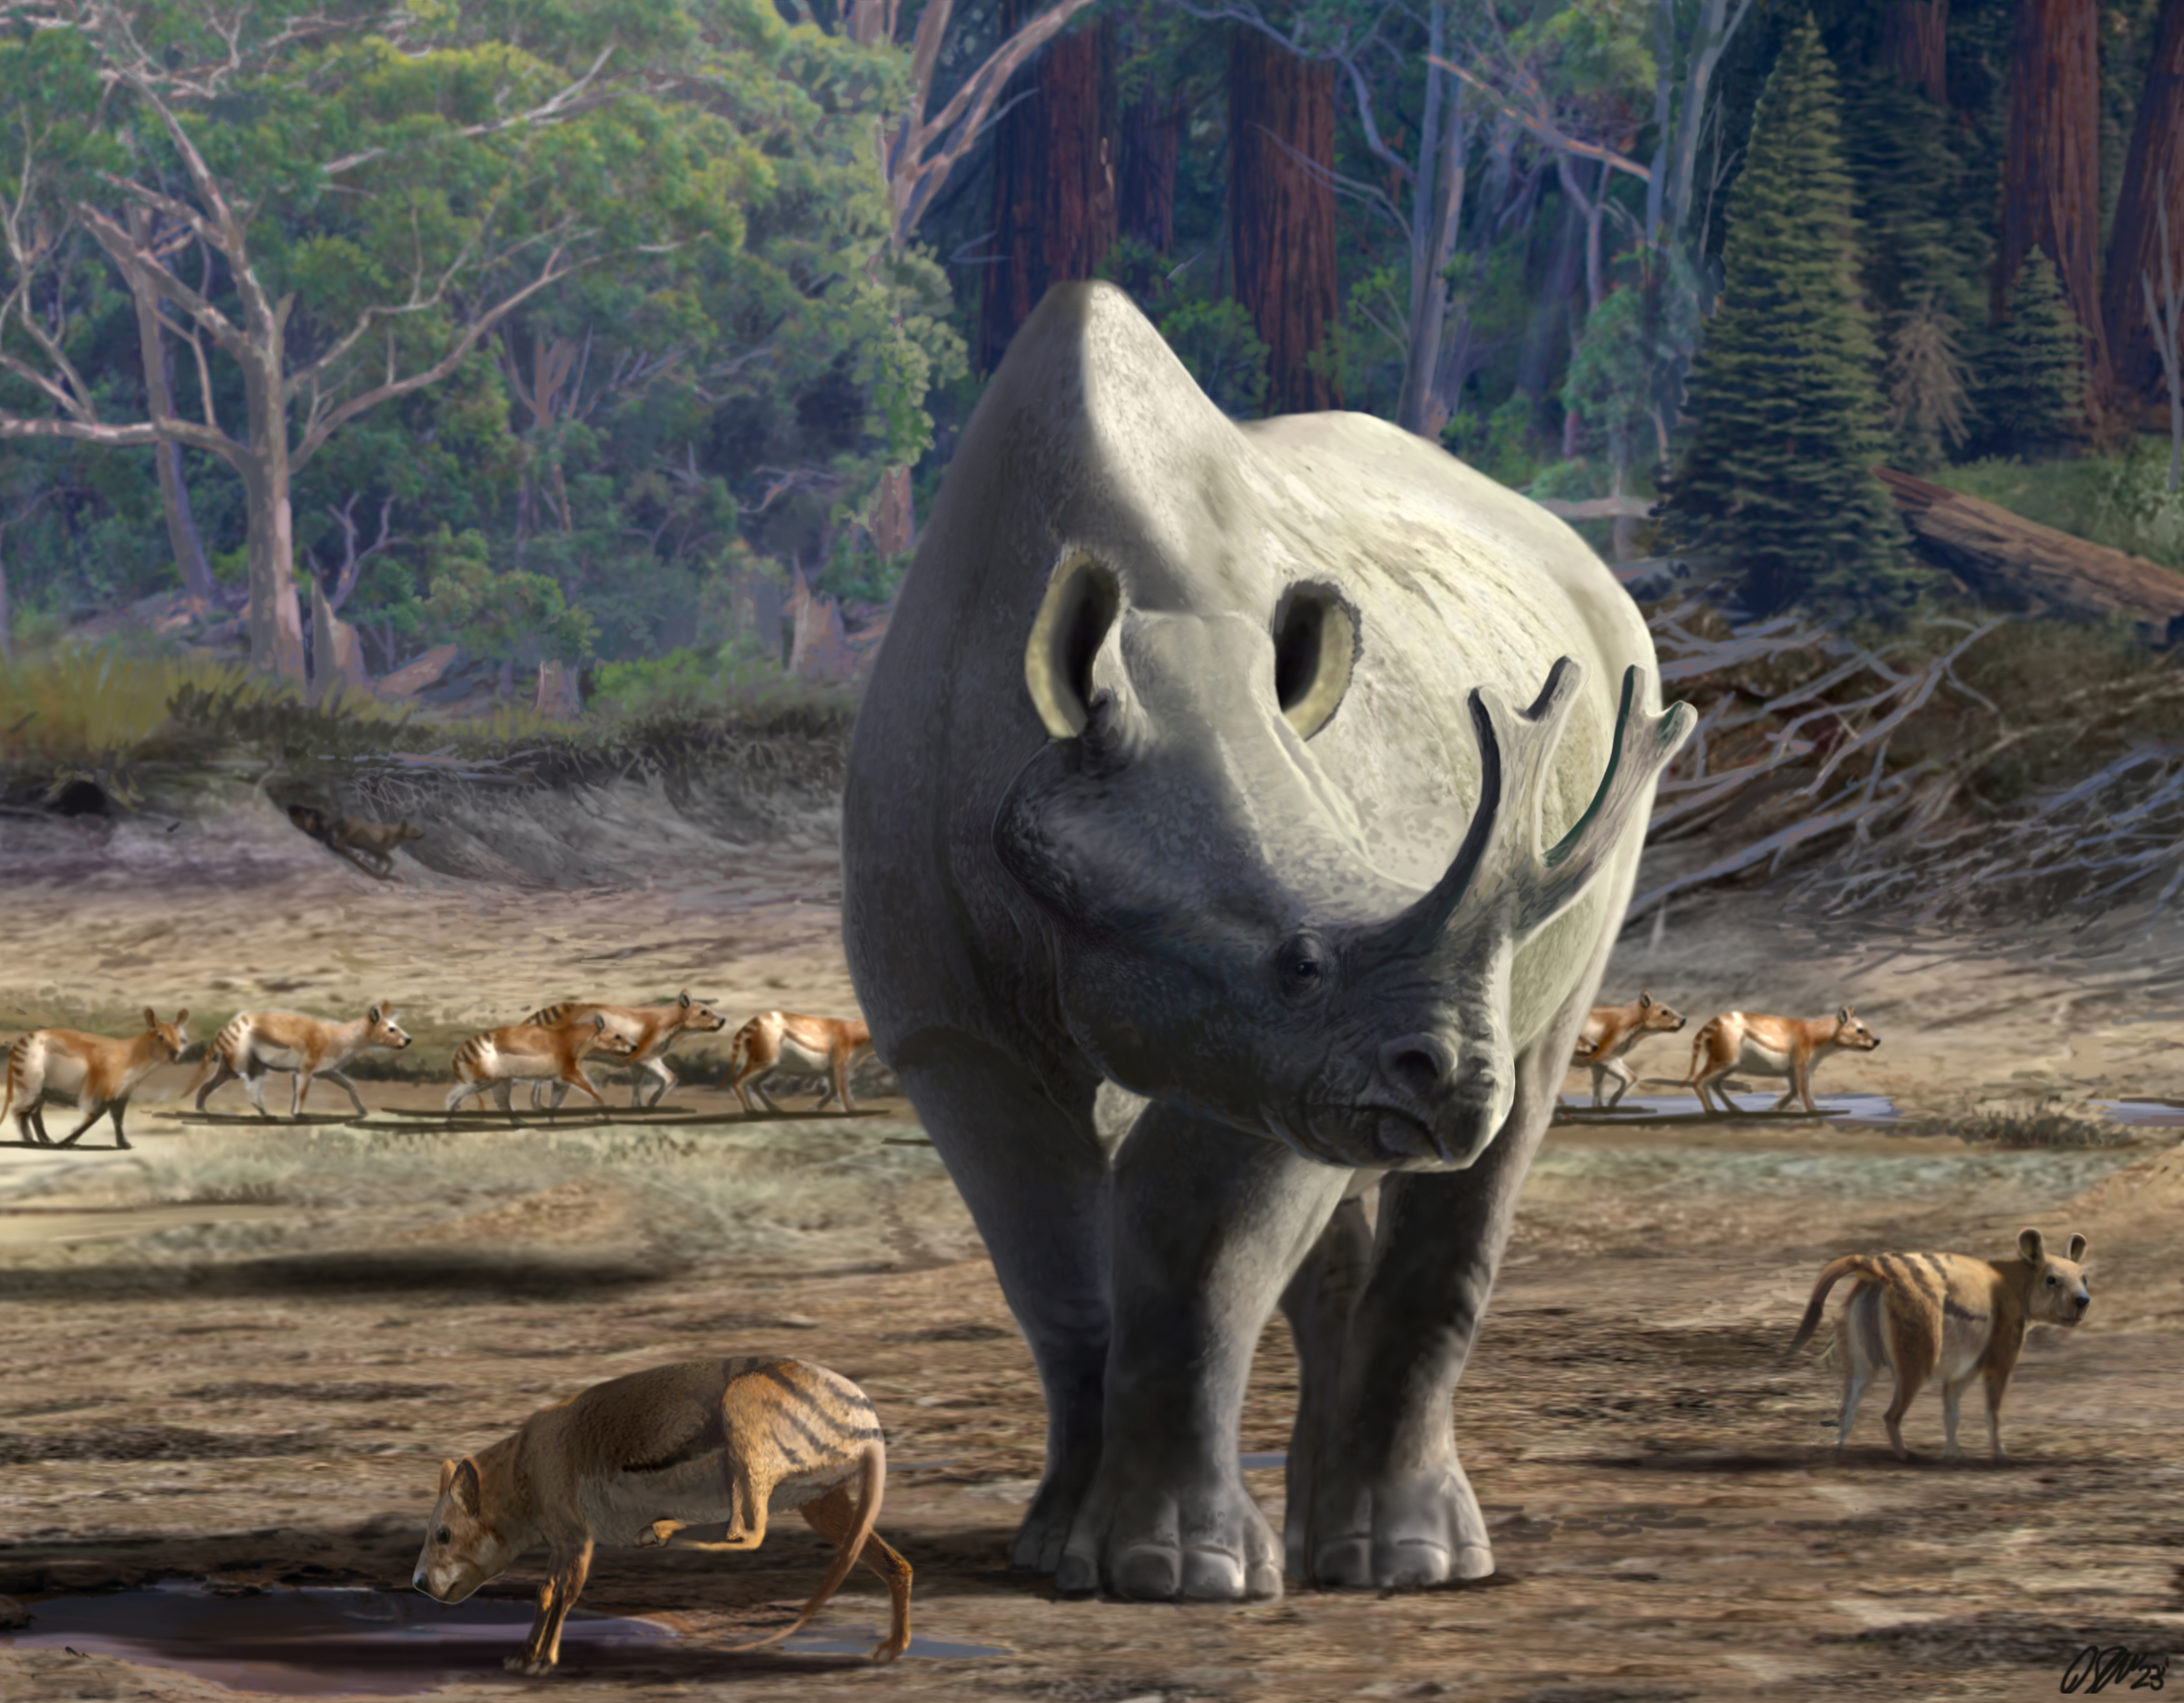 Artist's rendering showing a large rhino-like animal on a North American plain with smaller mammals and trees in the background